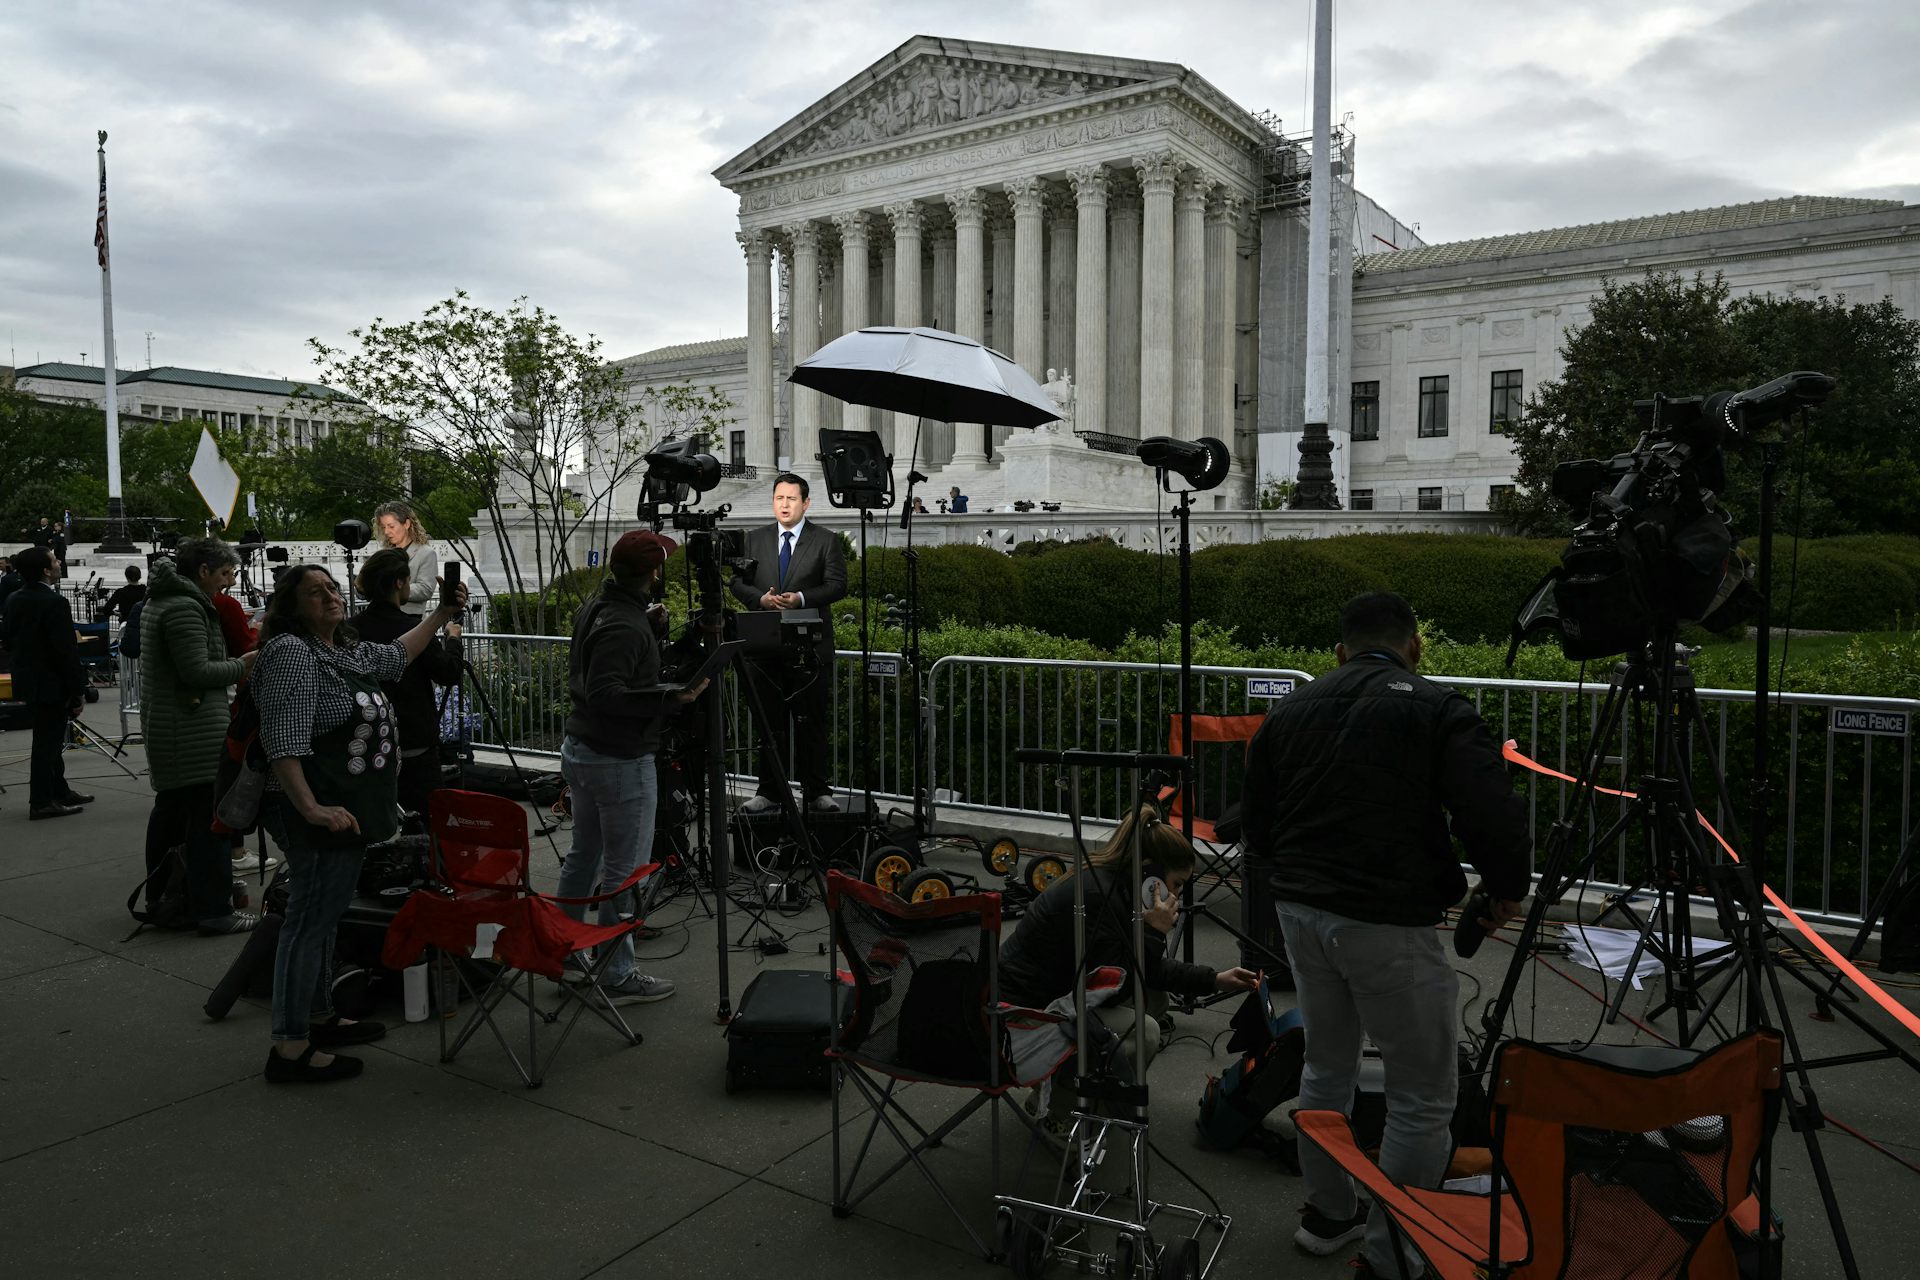 Reporters and camera operators set up in front of a large white, columned building.